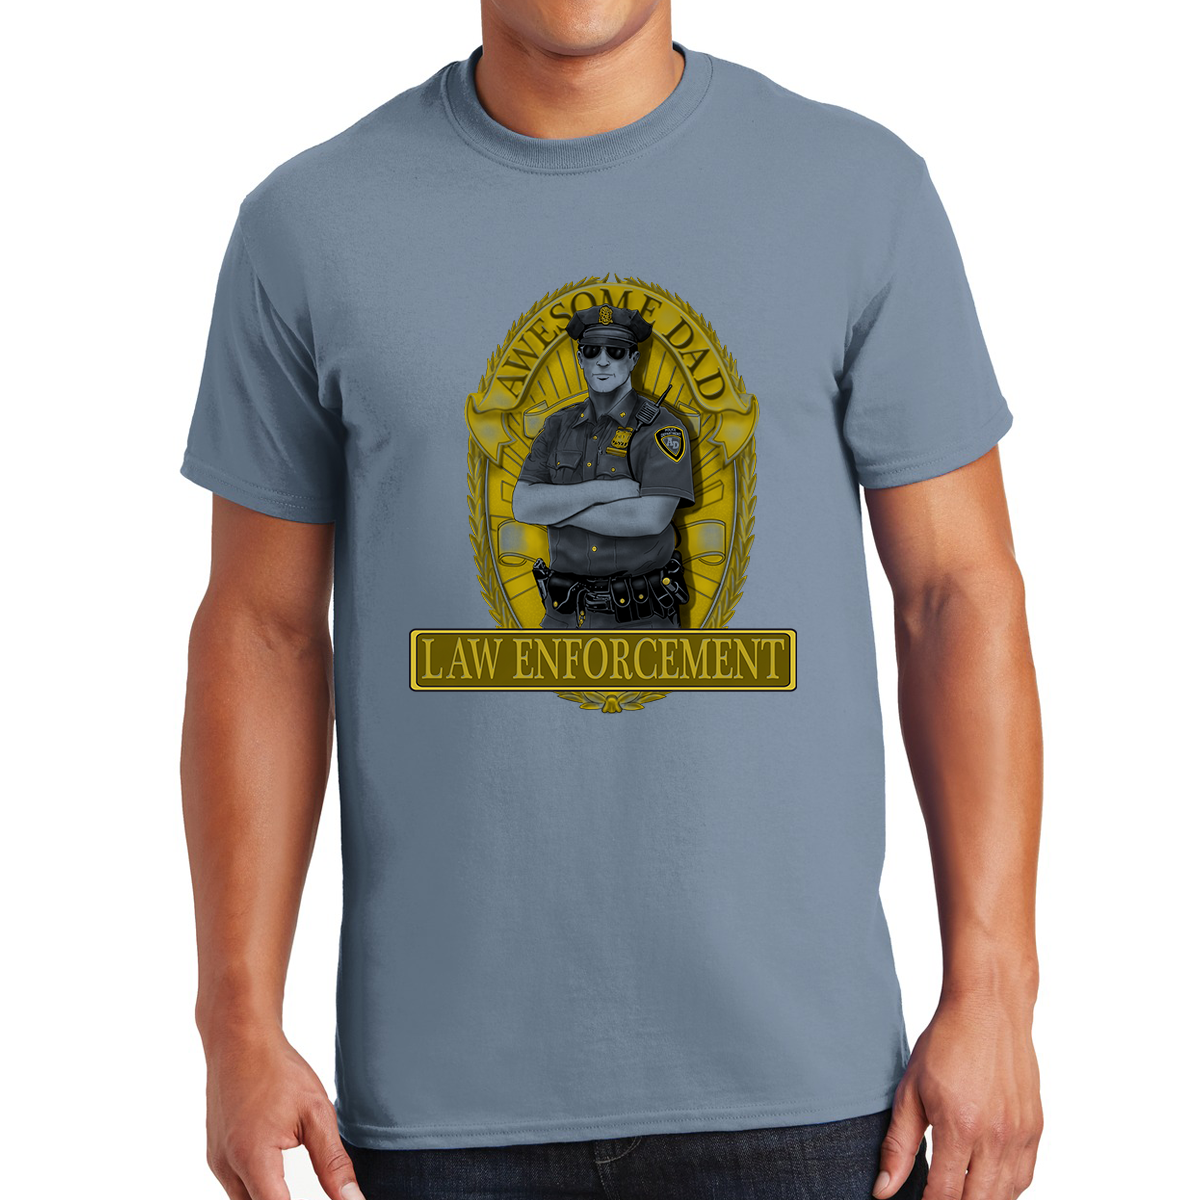 Awesome Dad In Law Enforcement Protecting The Community Nurturing The Family Gift For Dads T-shirt